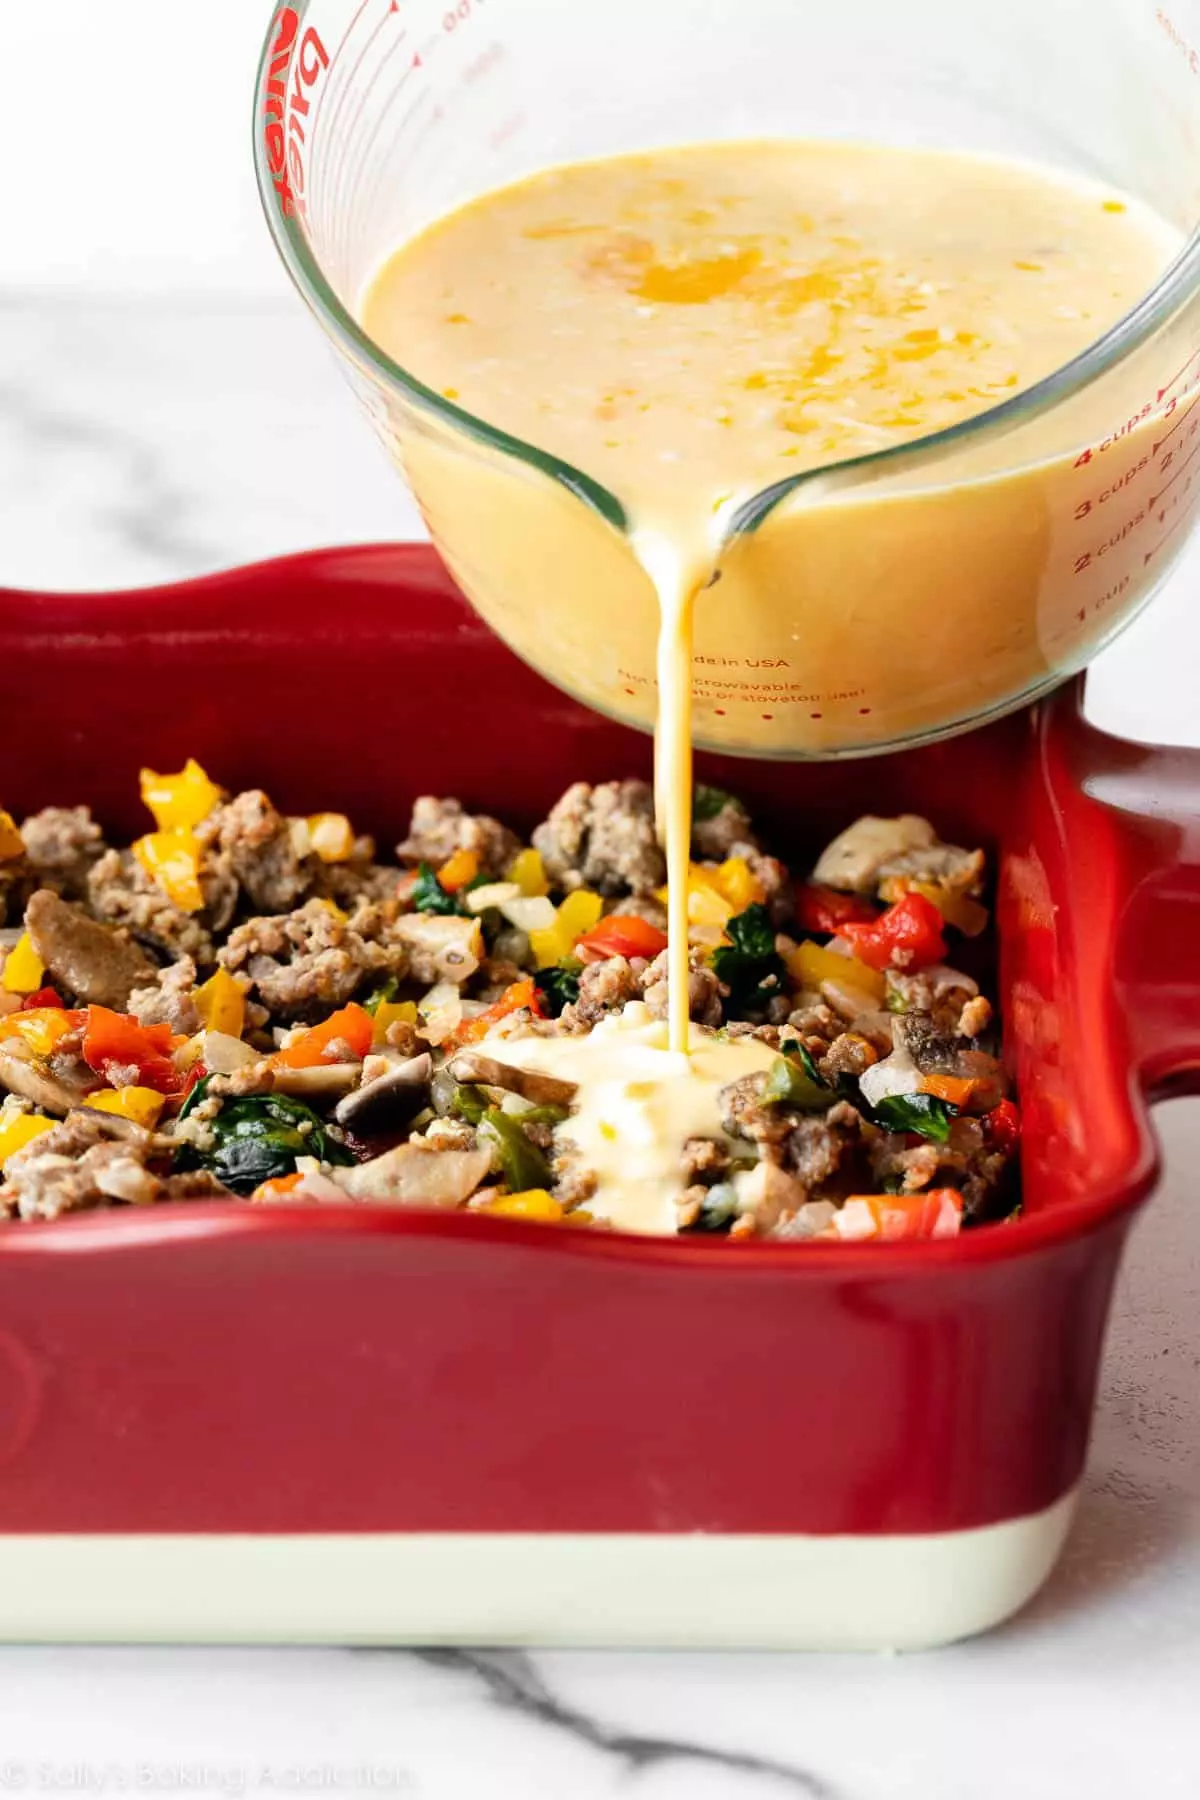 pouring egg mixture over sausage, vegetables, and bread in red casserole dish.